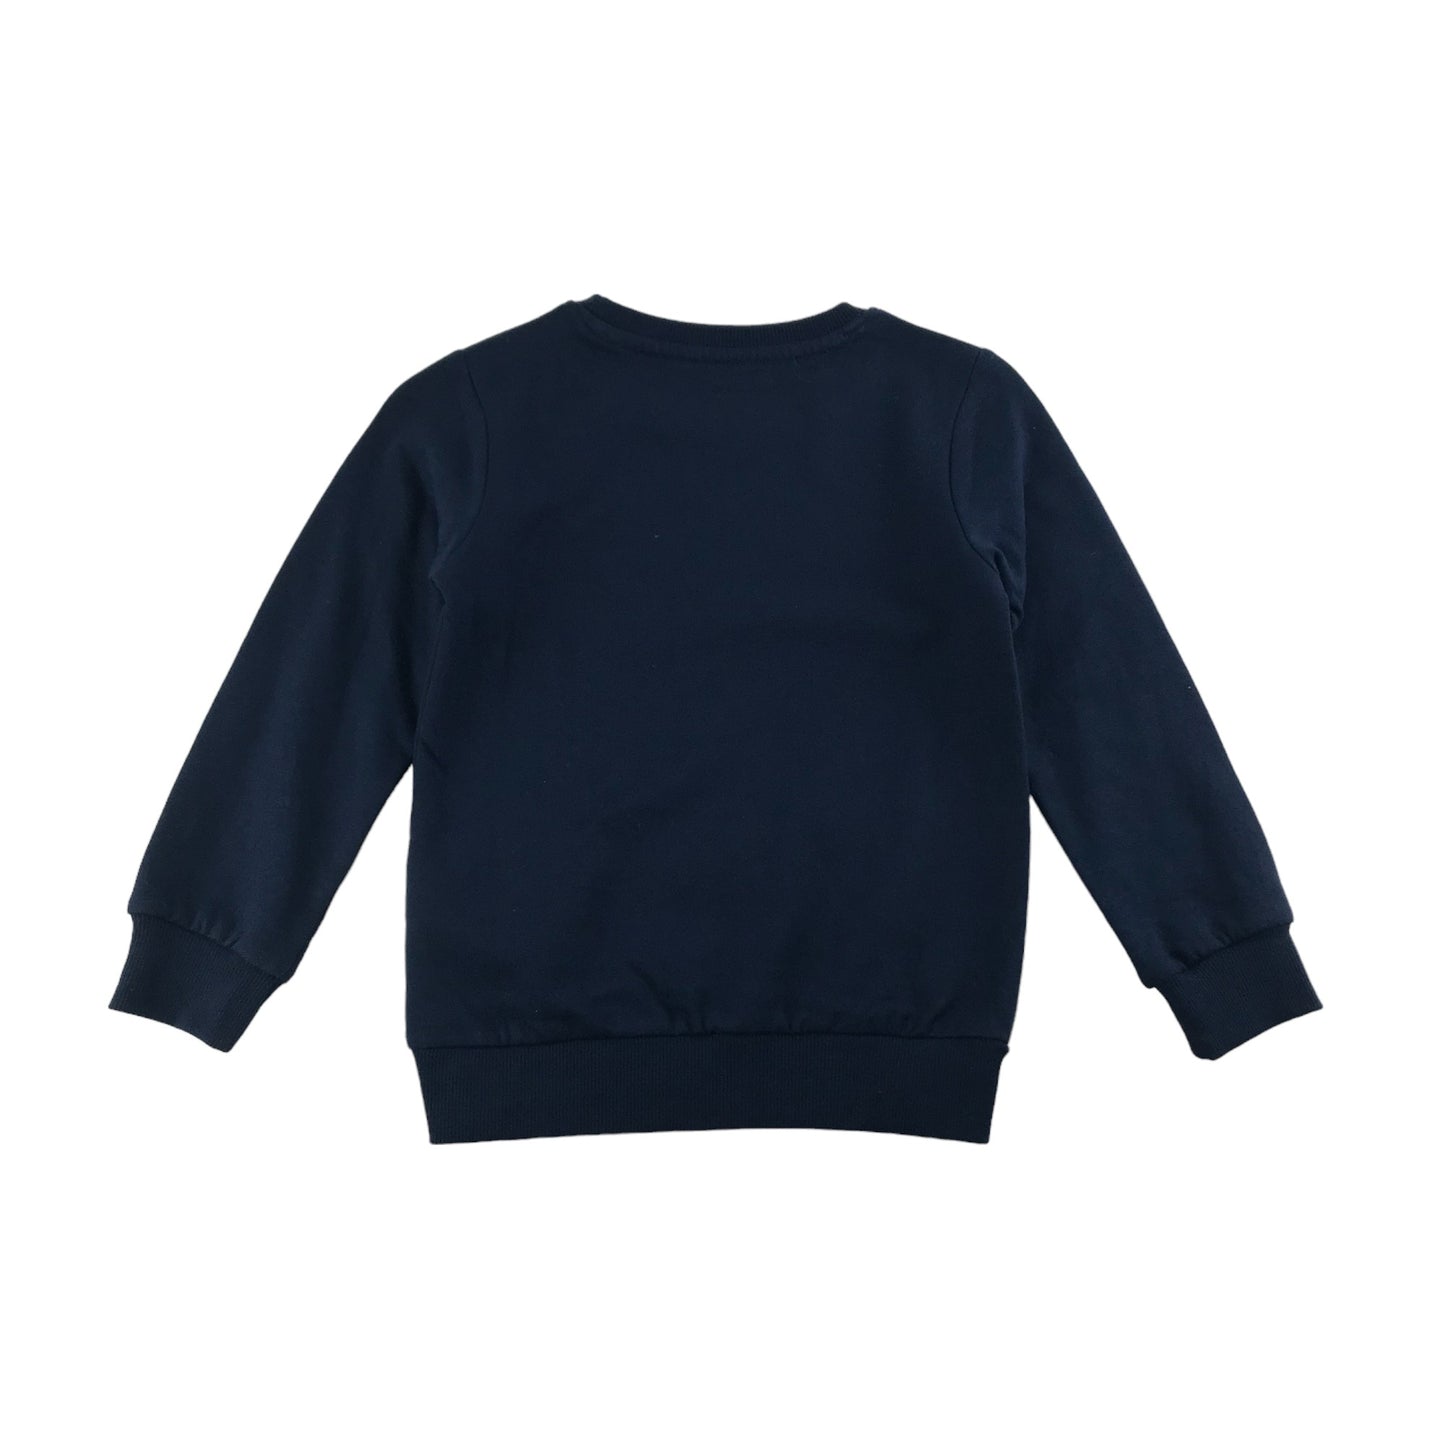 Character.com Sweater Age 6 Navy Blue Disney Frozen Jersey Pullover Cotton